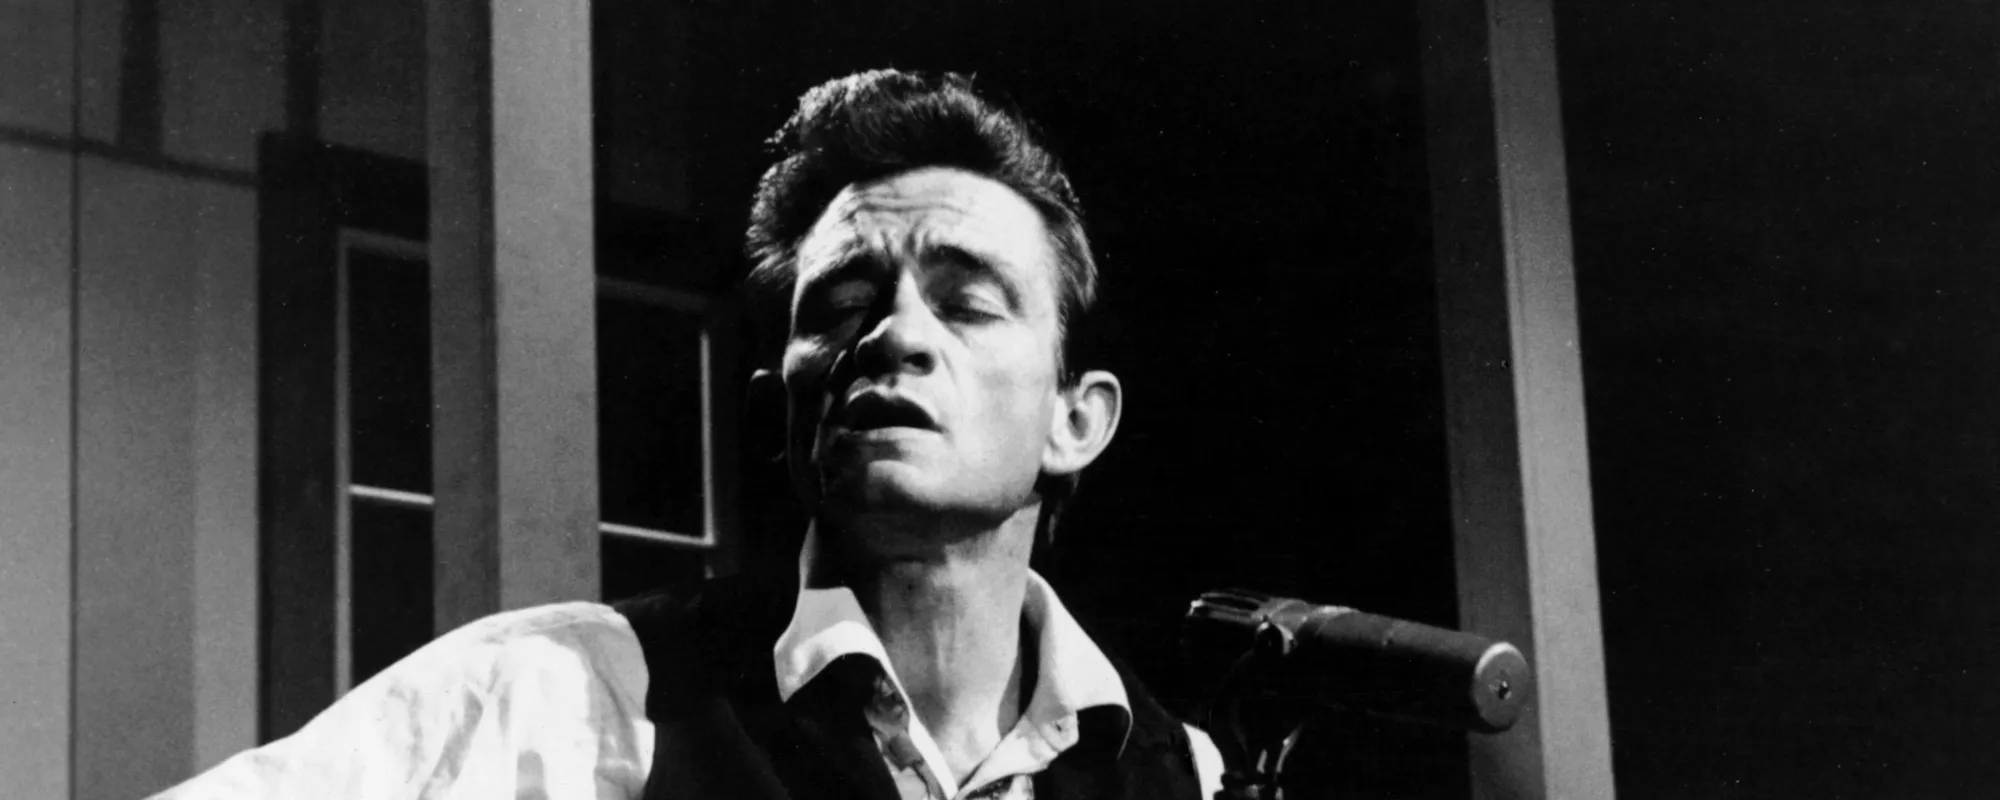 Behind the Death of Johnny Cash